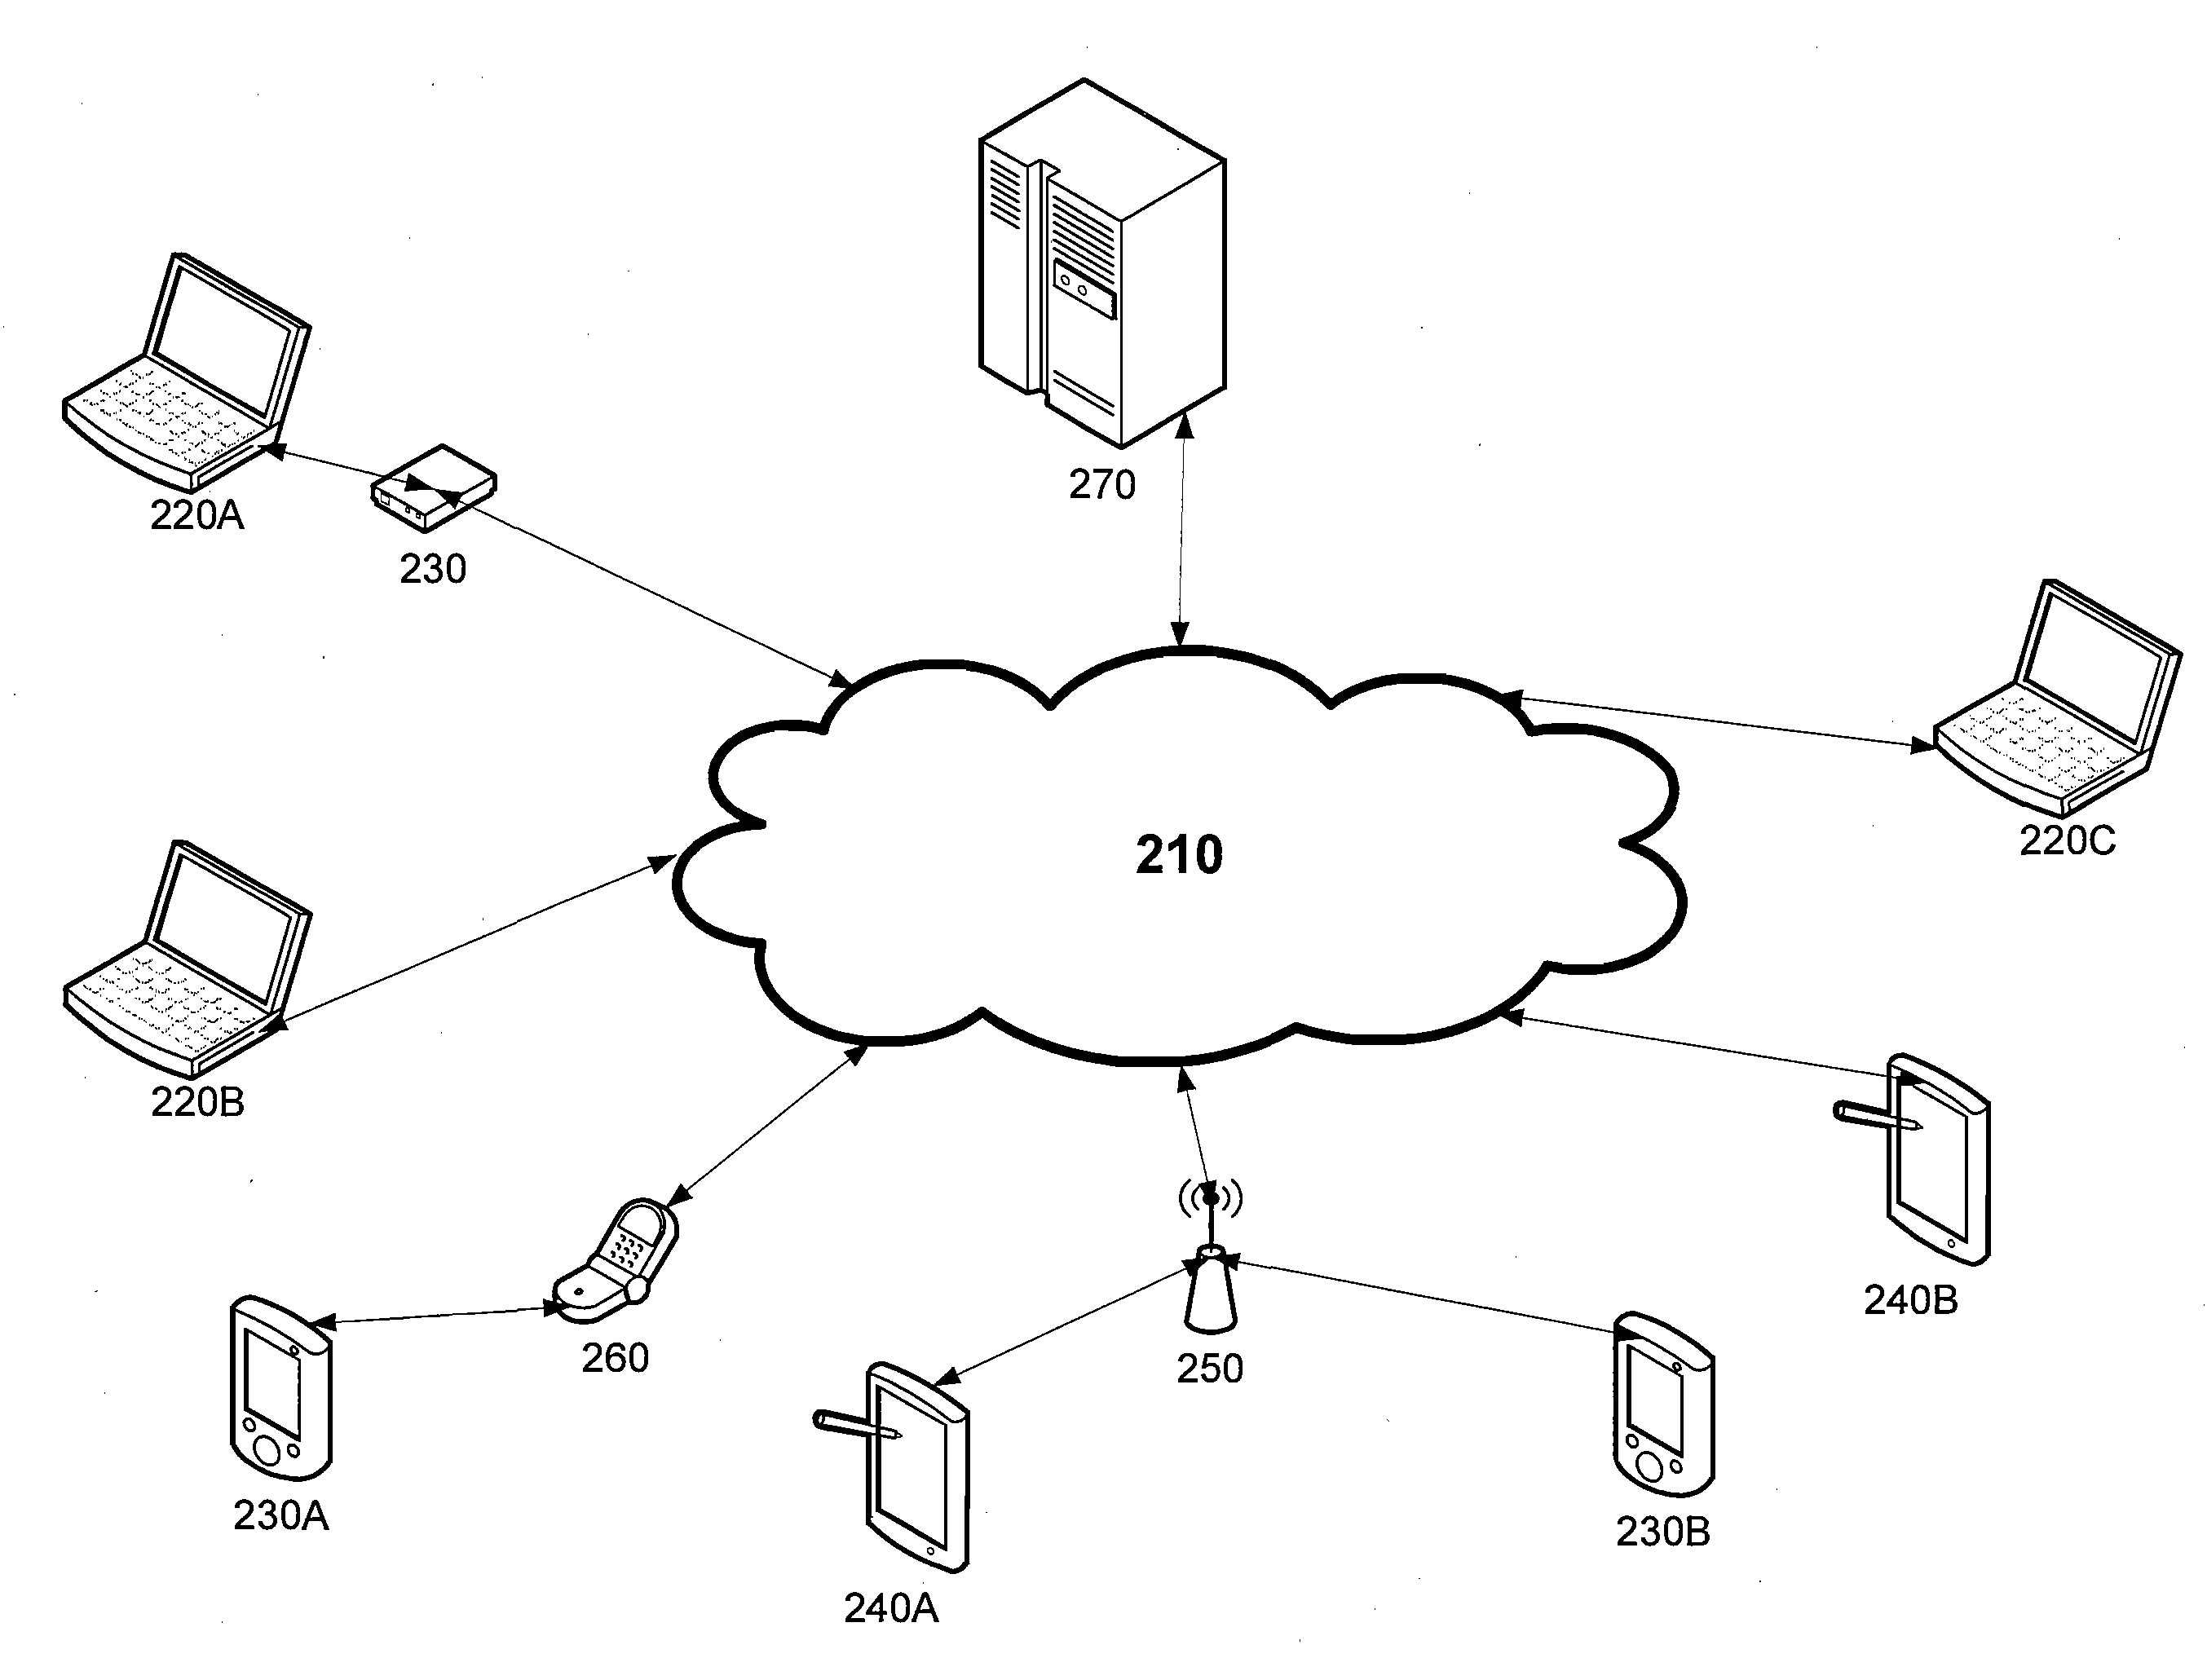 Data cache techniques in support of synchronization of databases in a distributed environment